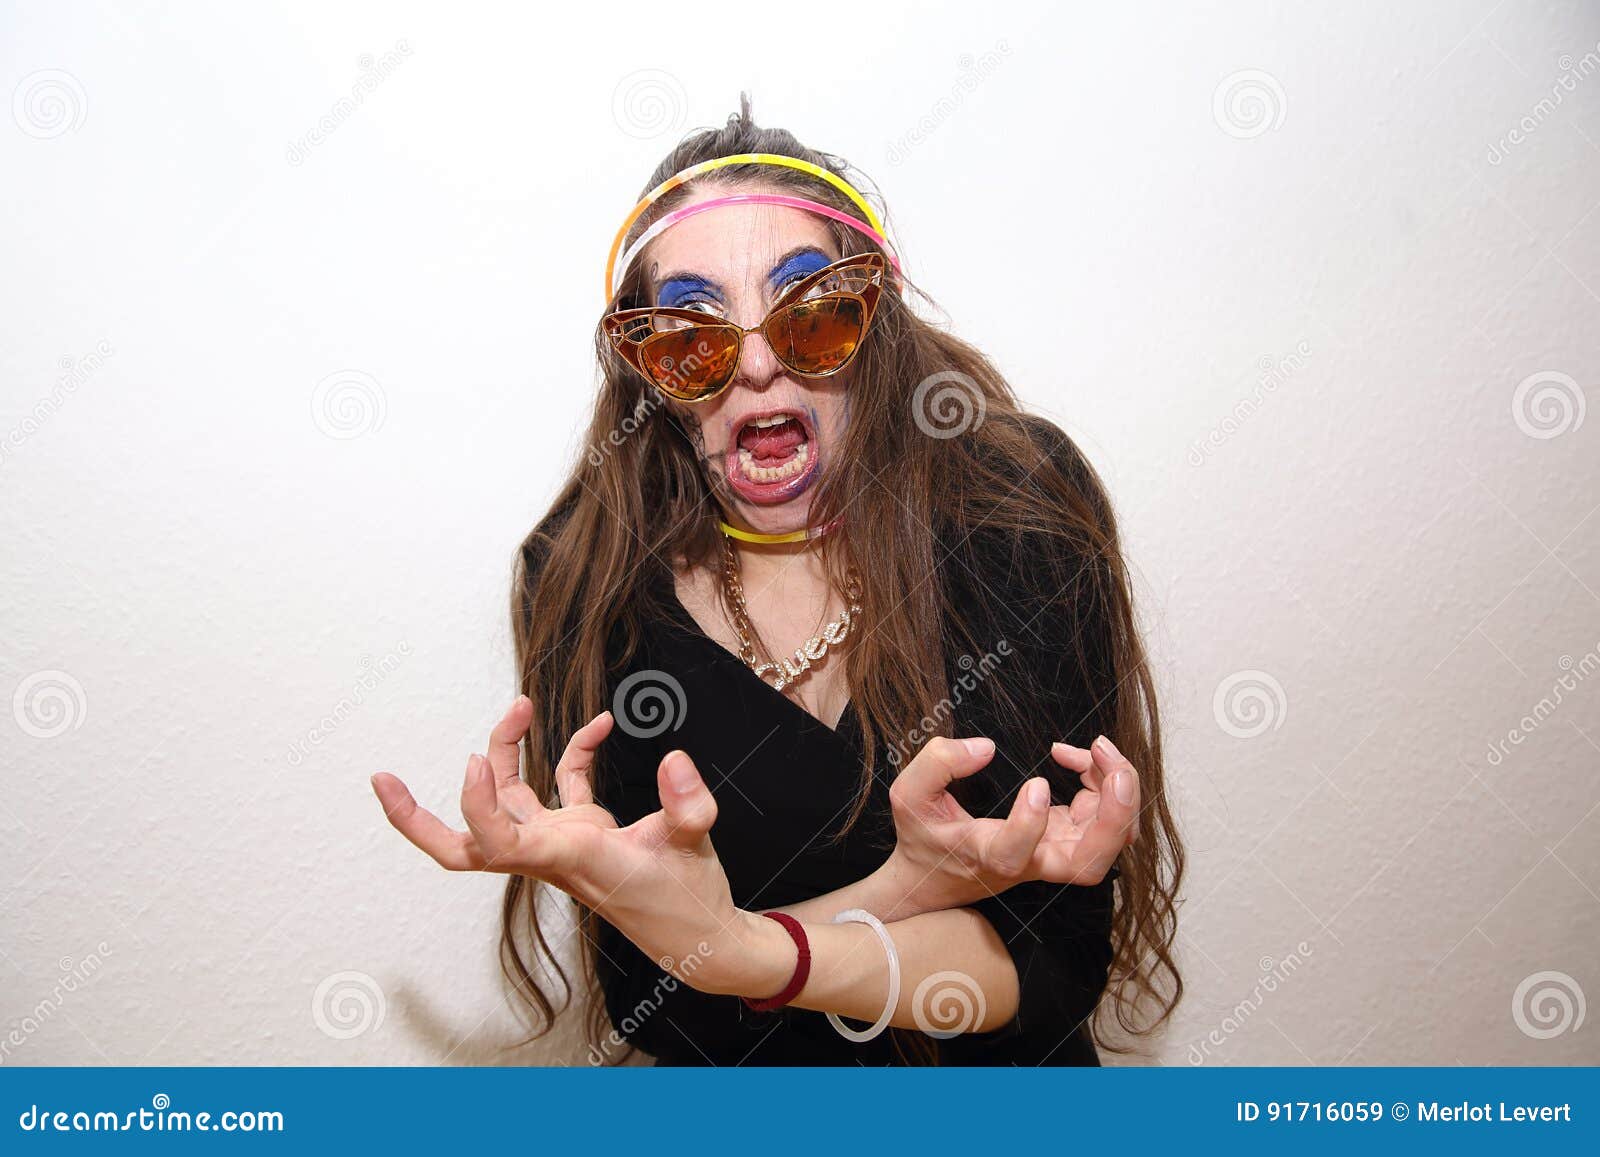 Funny Mad Woman Screaming with Rage and Frustration Stock Image - Image of  eyes, face: 91716059